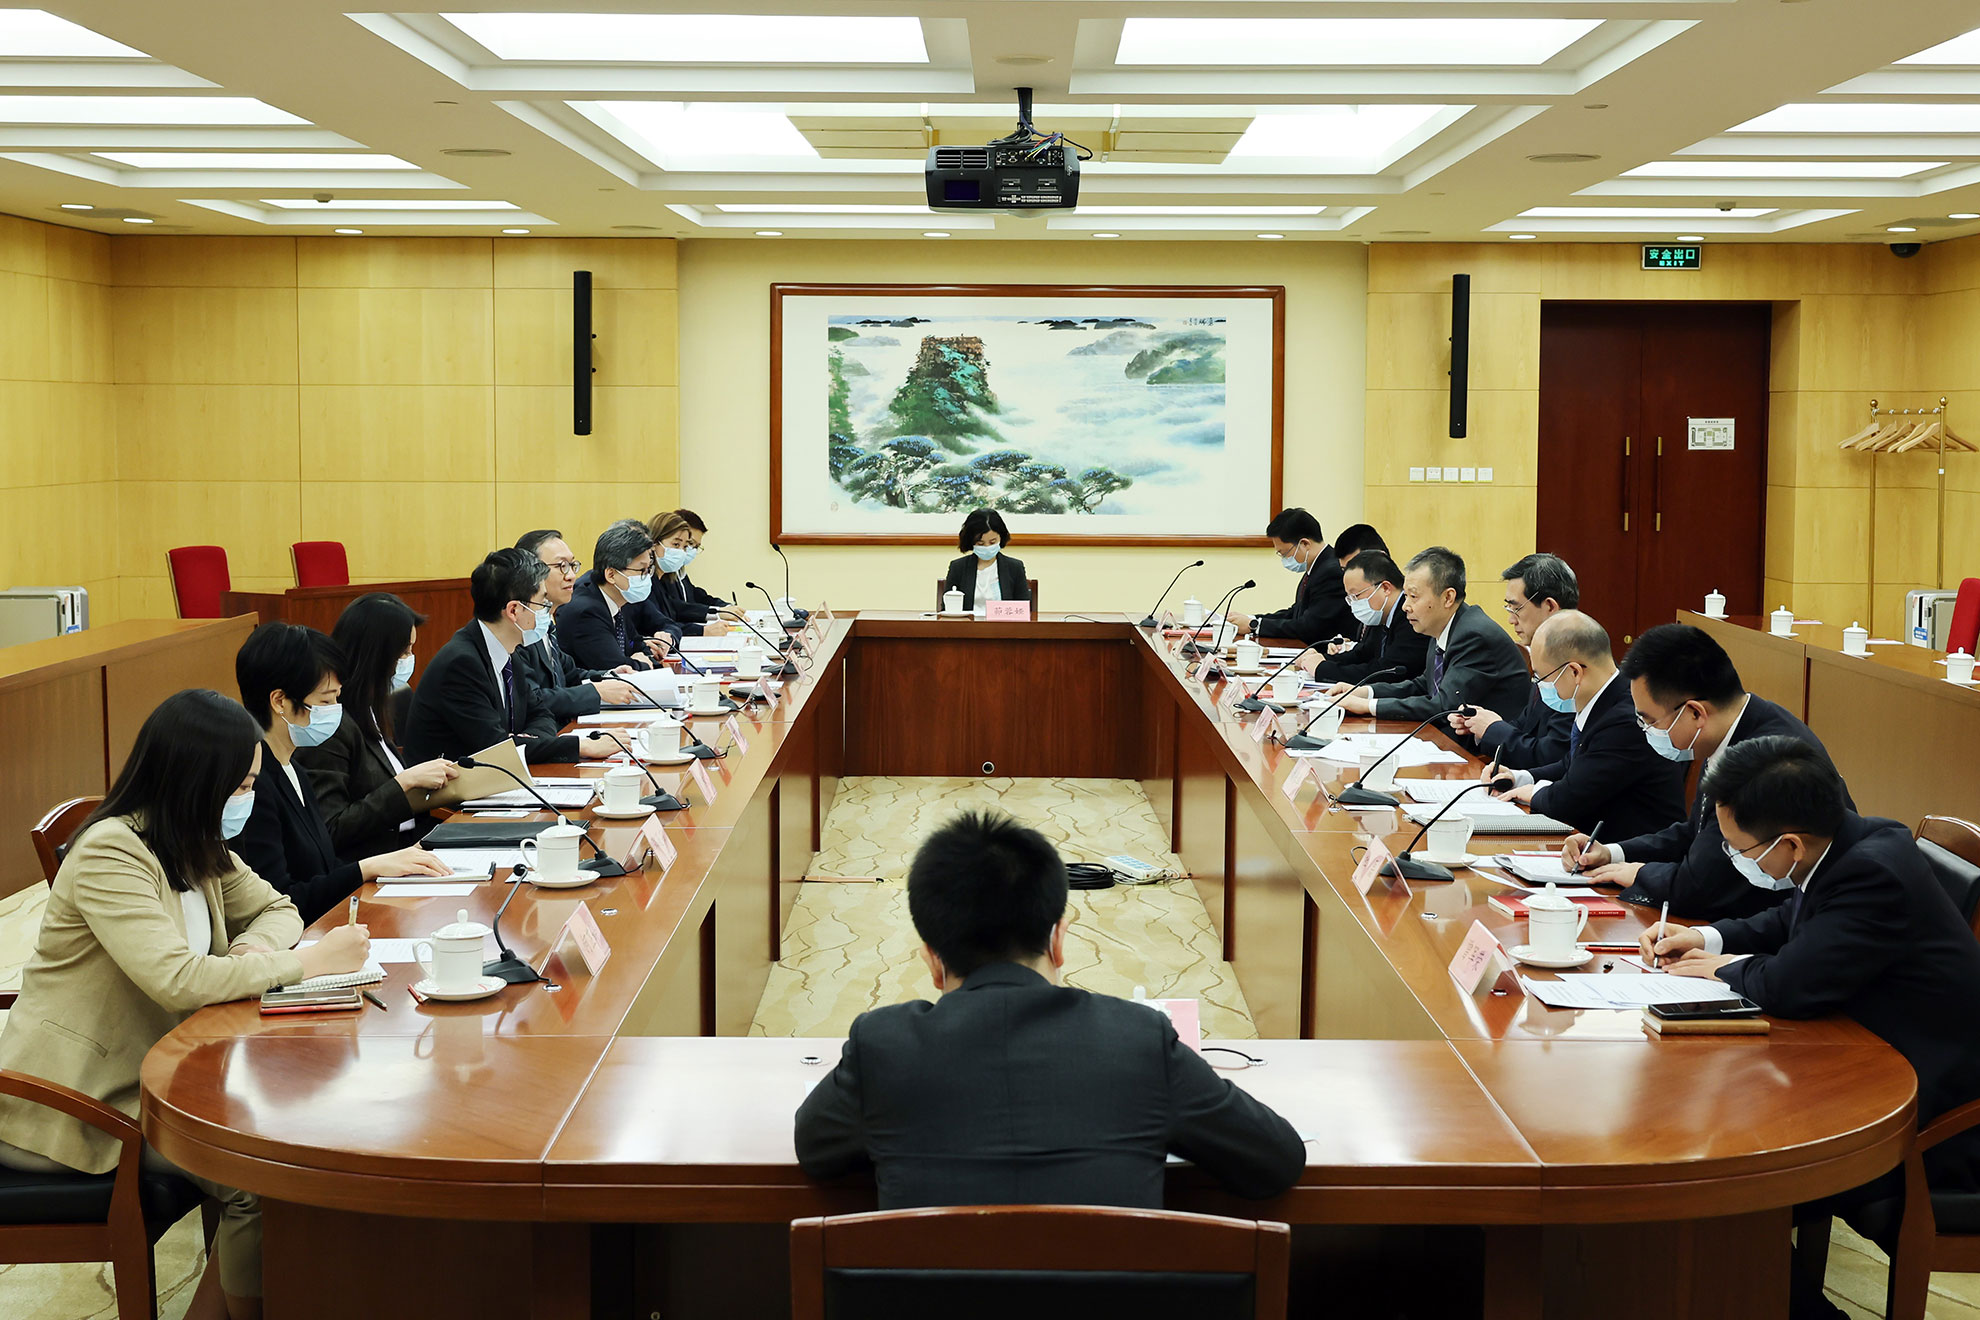 The Secretary for Justice, Mr Paul Lam, SC (fifth left), calls on the Legislative Affairs Commission and the Hong Kong Special Administrative Region (HKSAR) Basic Law Committee of the Standing Committee of the National People's Congress (NPCSC) and meets with the Director of the Research Office of the HKSAR Basic Law Committee and Macao Special Administrative Region Basic Law Committee of the NPCSC, Mr Yang Zhaoye (fifth right), and the Administrative Office Director of the Legislative Affairs Commission of the NPCSC, Mr Sun Zhenping (fourth right), on the afternoon of June 1 in Beijing.